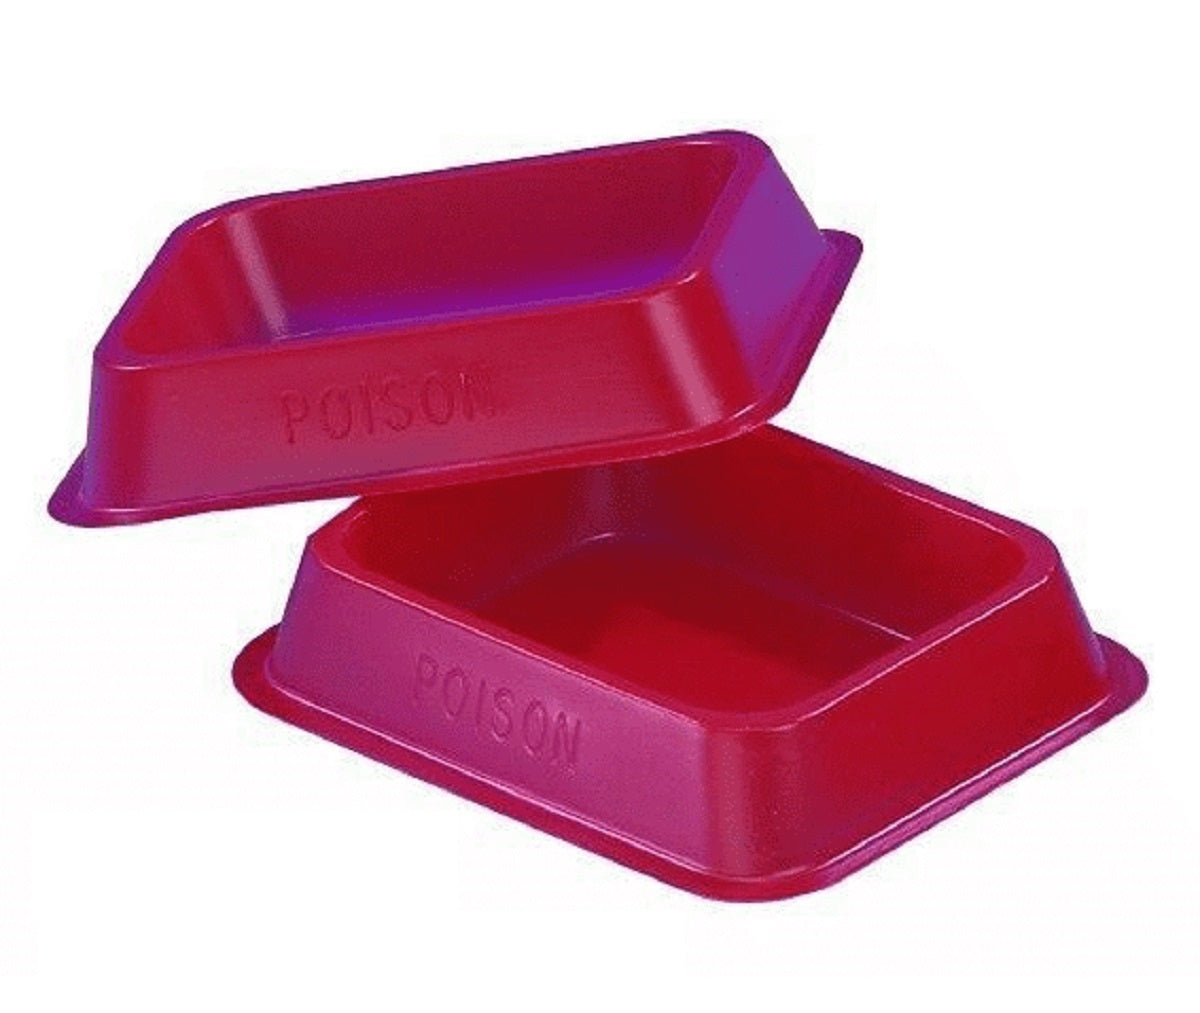 RAT MOUSE BAIT TRAYS FOR USE WITH MOUSE OR RAT POISON TRAY BAIT STATION TRAY - Moth Control